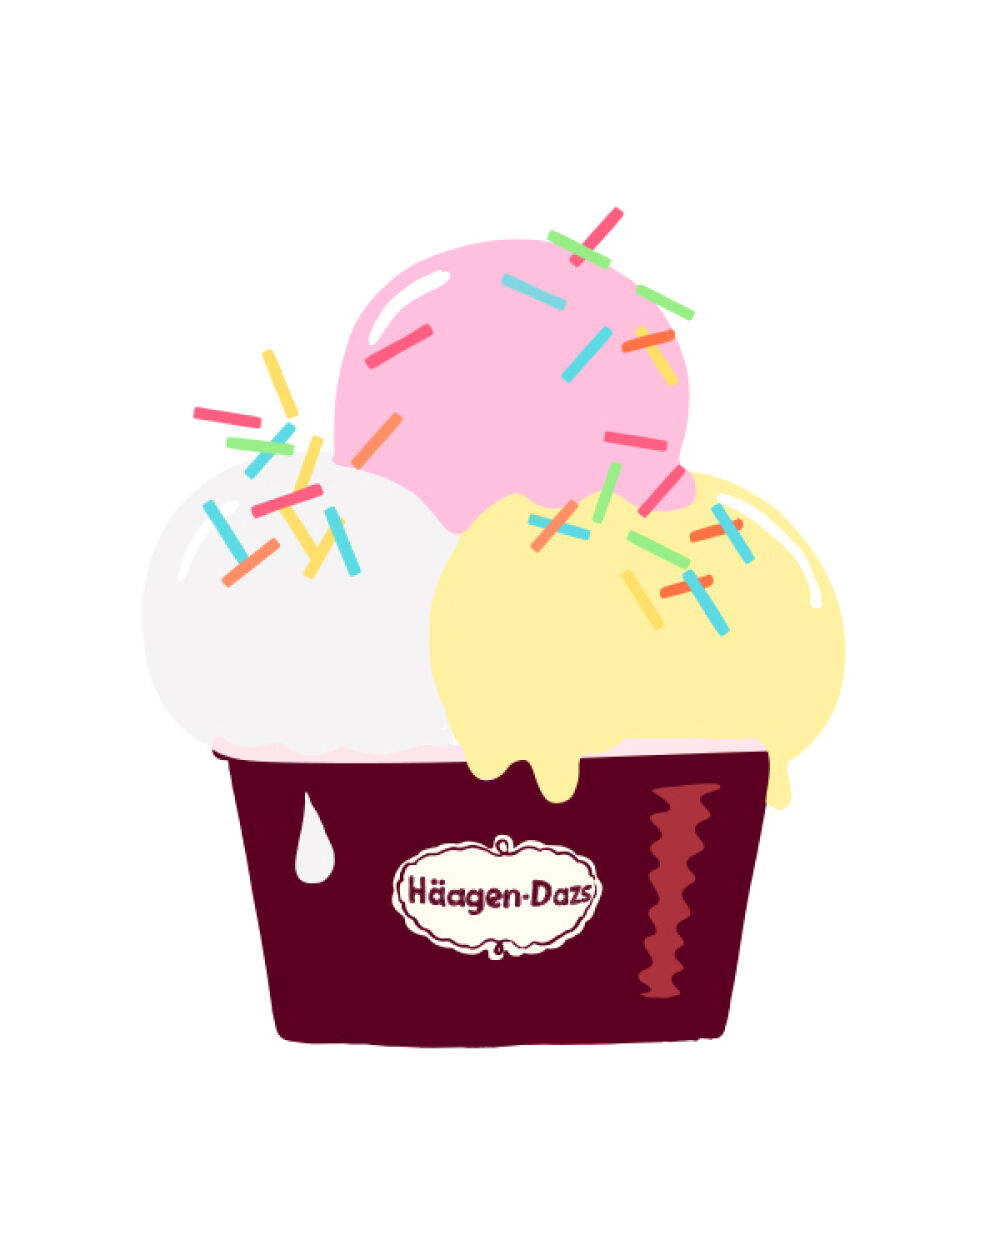 Animated illustrations by Erica Jacobson for Häagen-Dazs